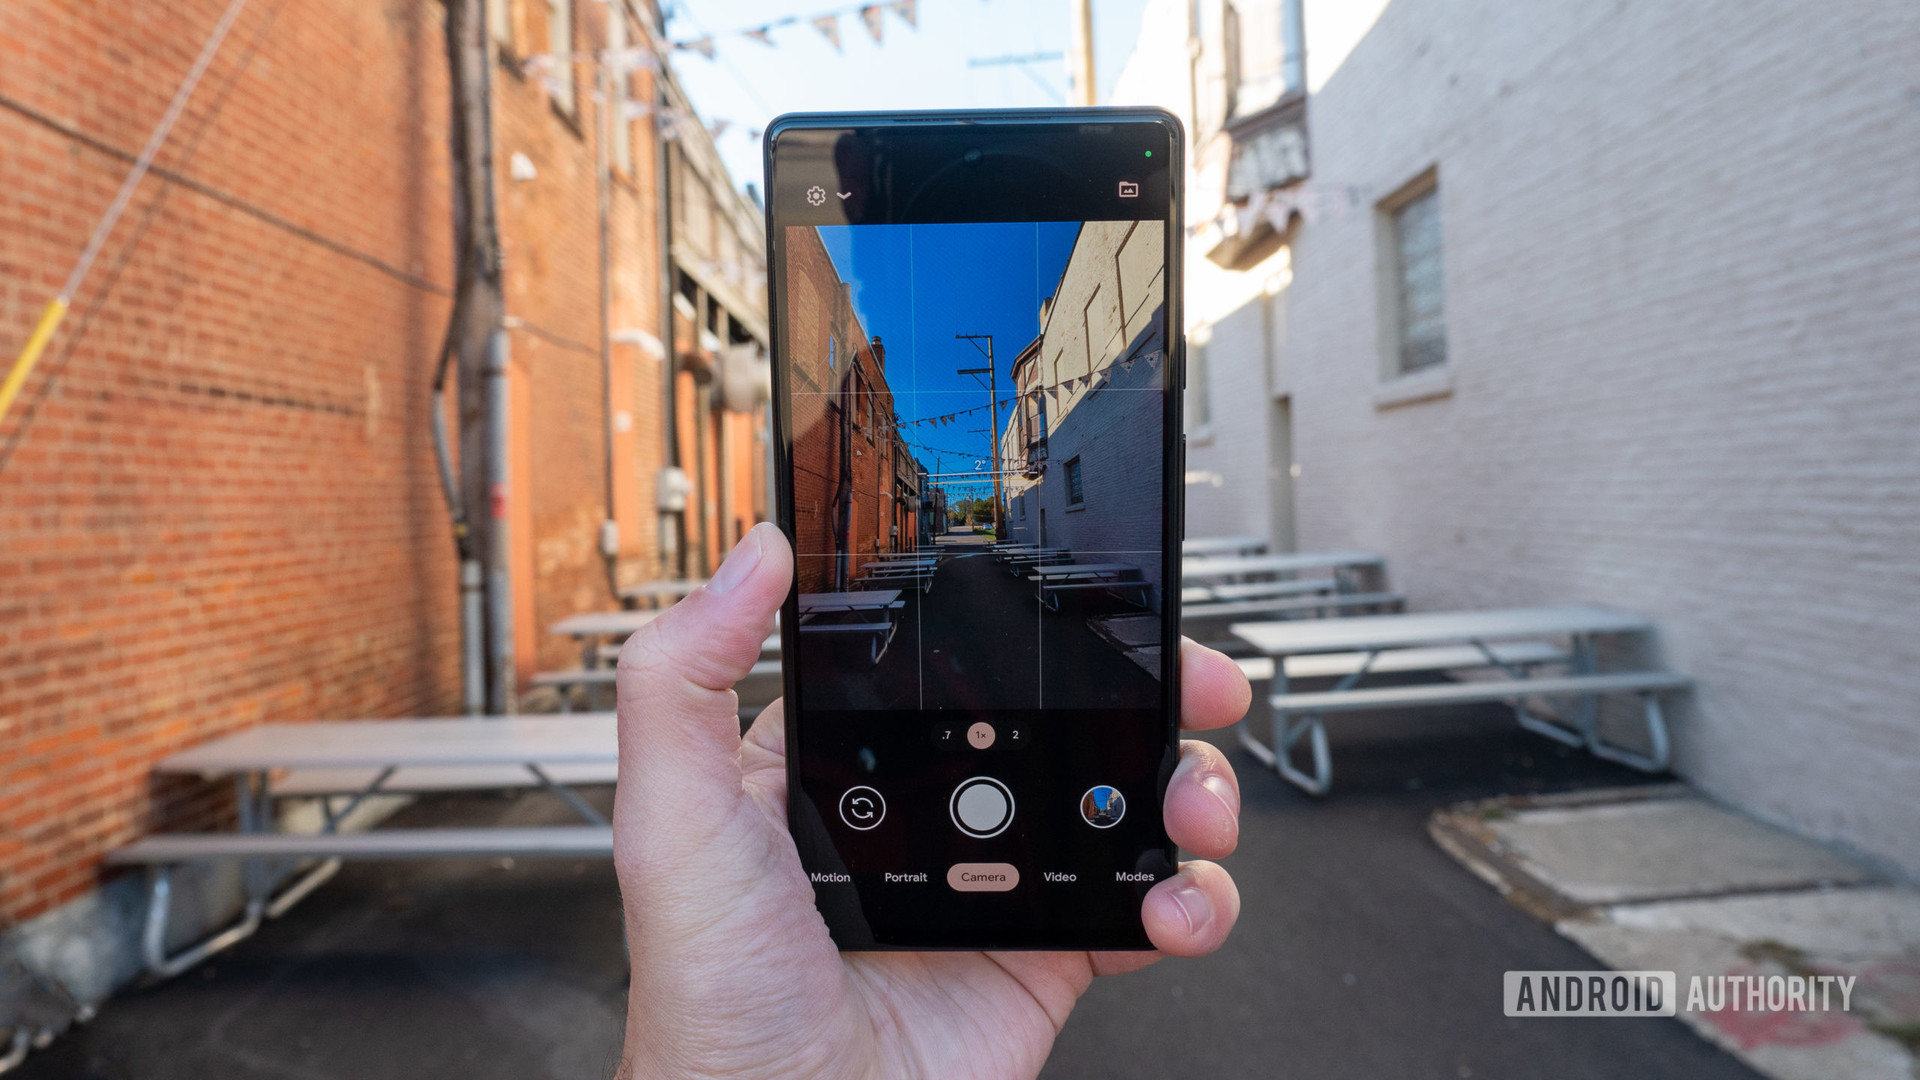 The Google Pixel 6 in hand in the alley showing the camera app